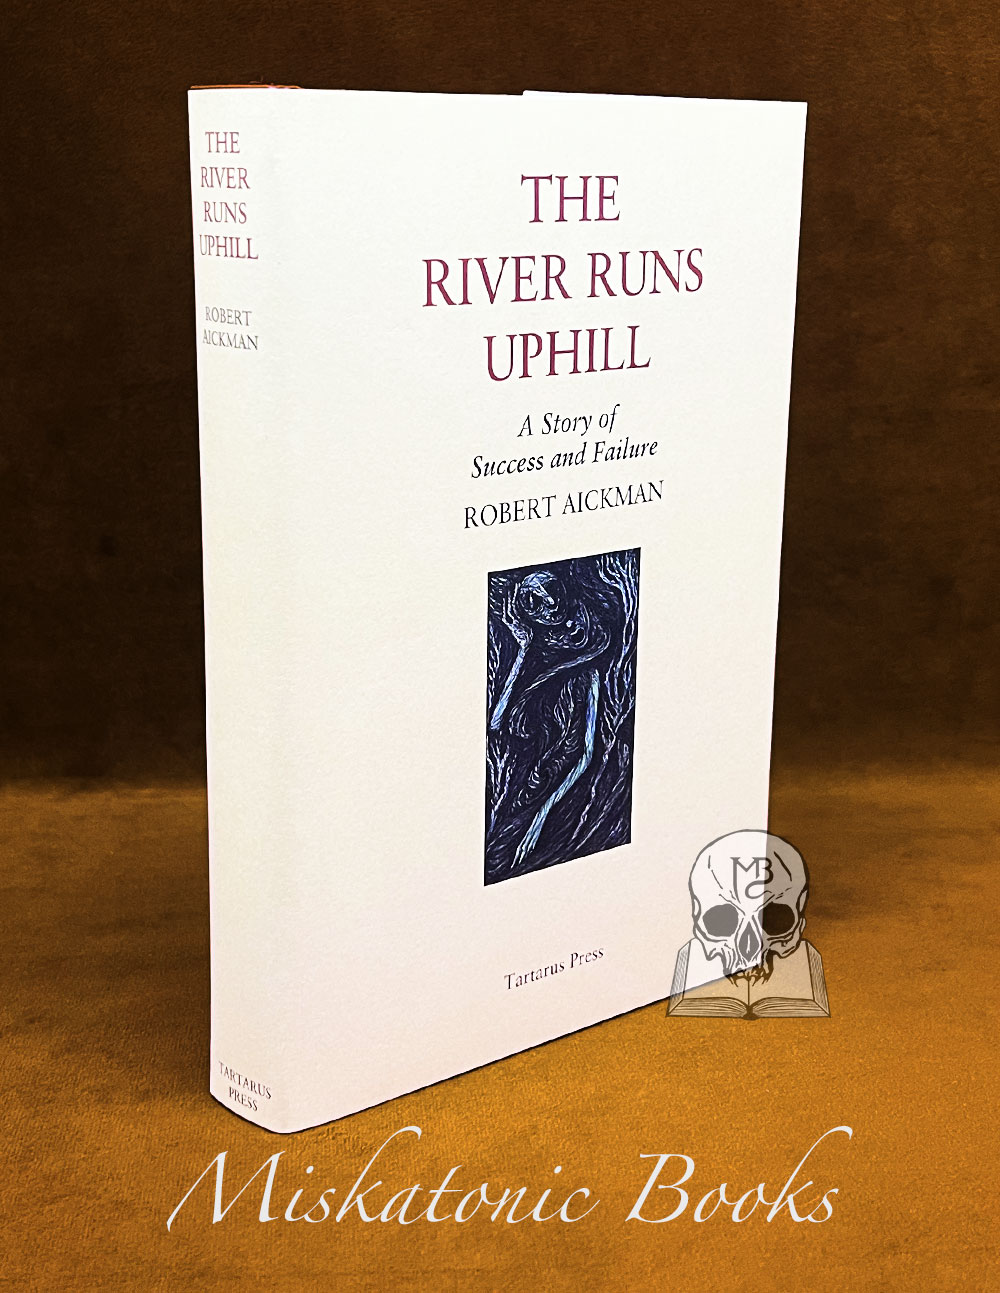 THE RIVER RUNS UPHILL: A Story of Success and Failure by Robert Aickman - Hardcover edition limited to 350 copies